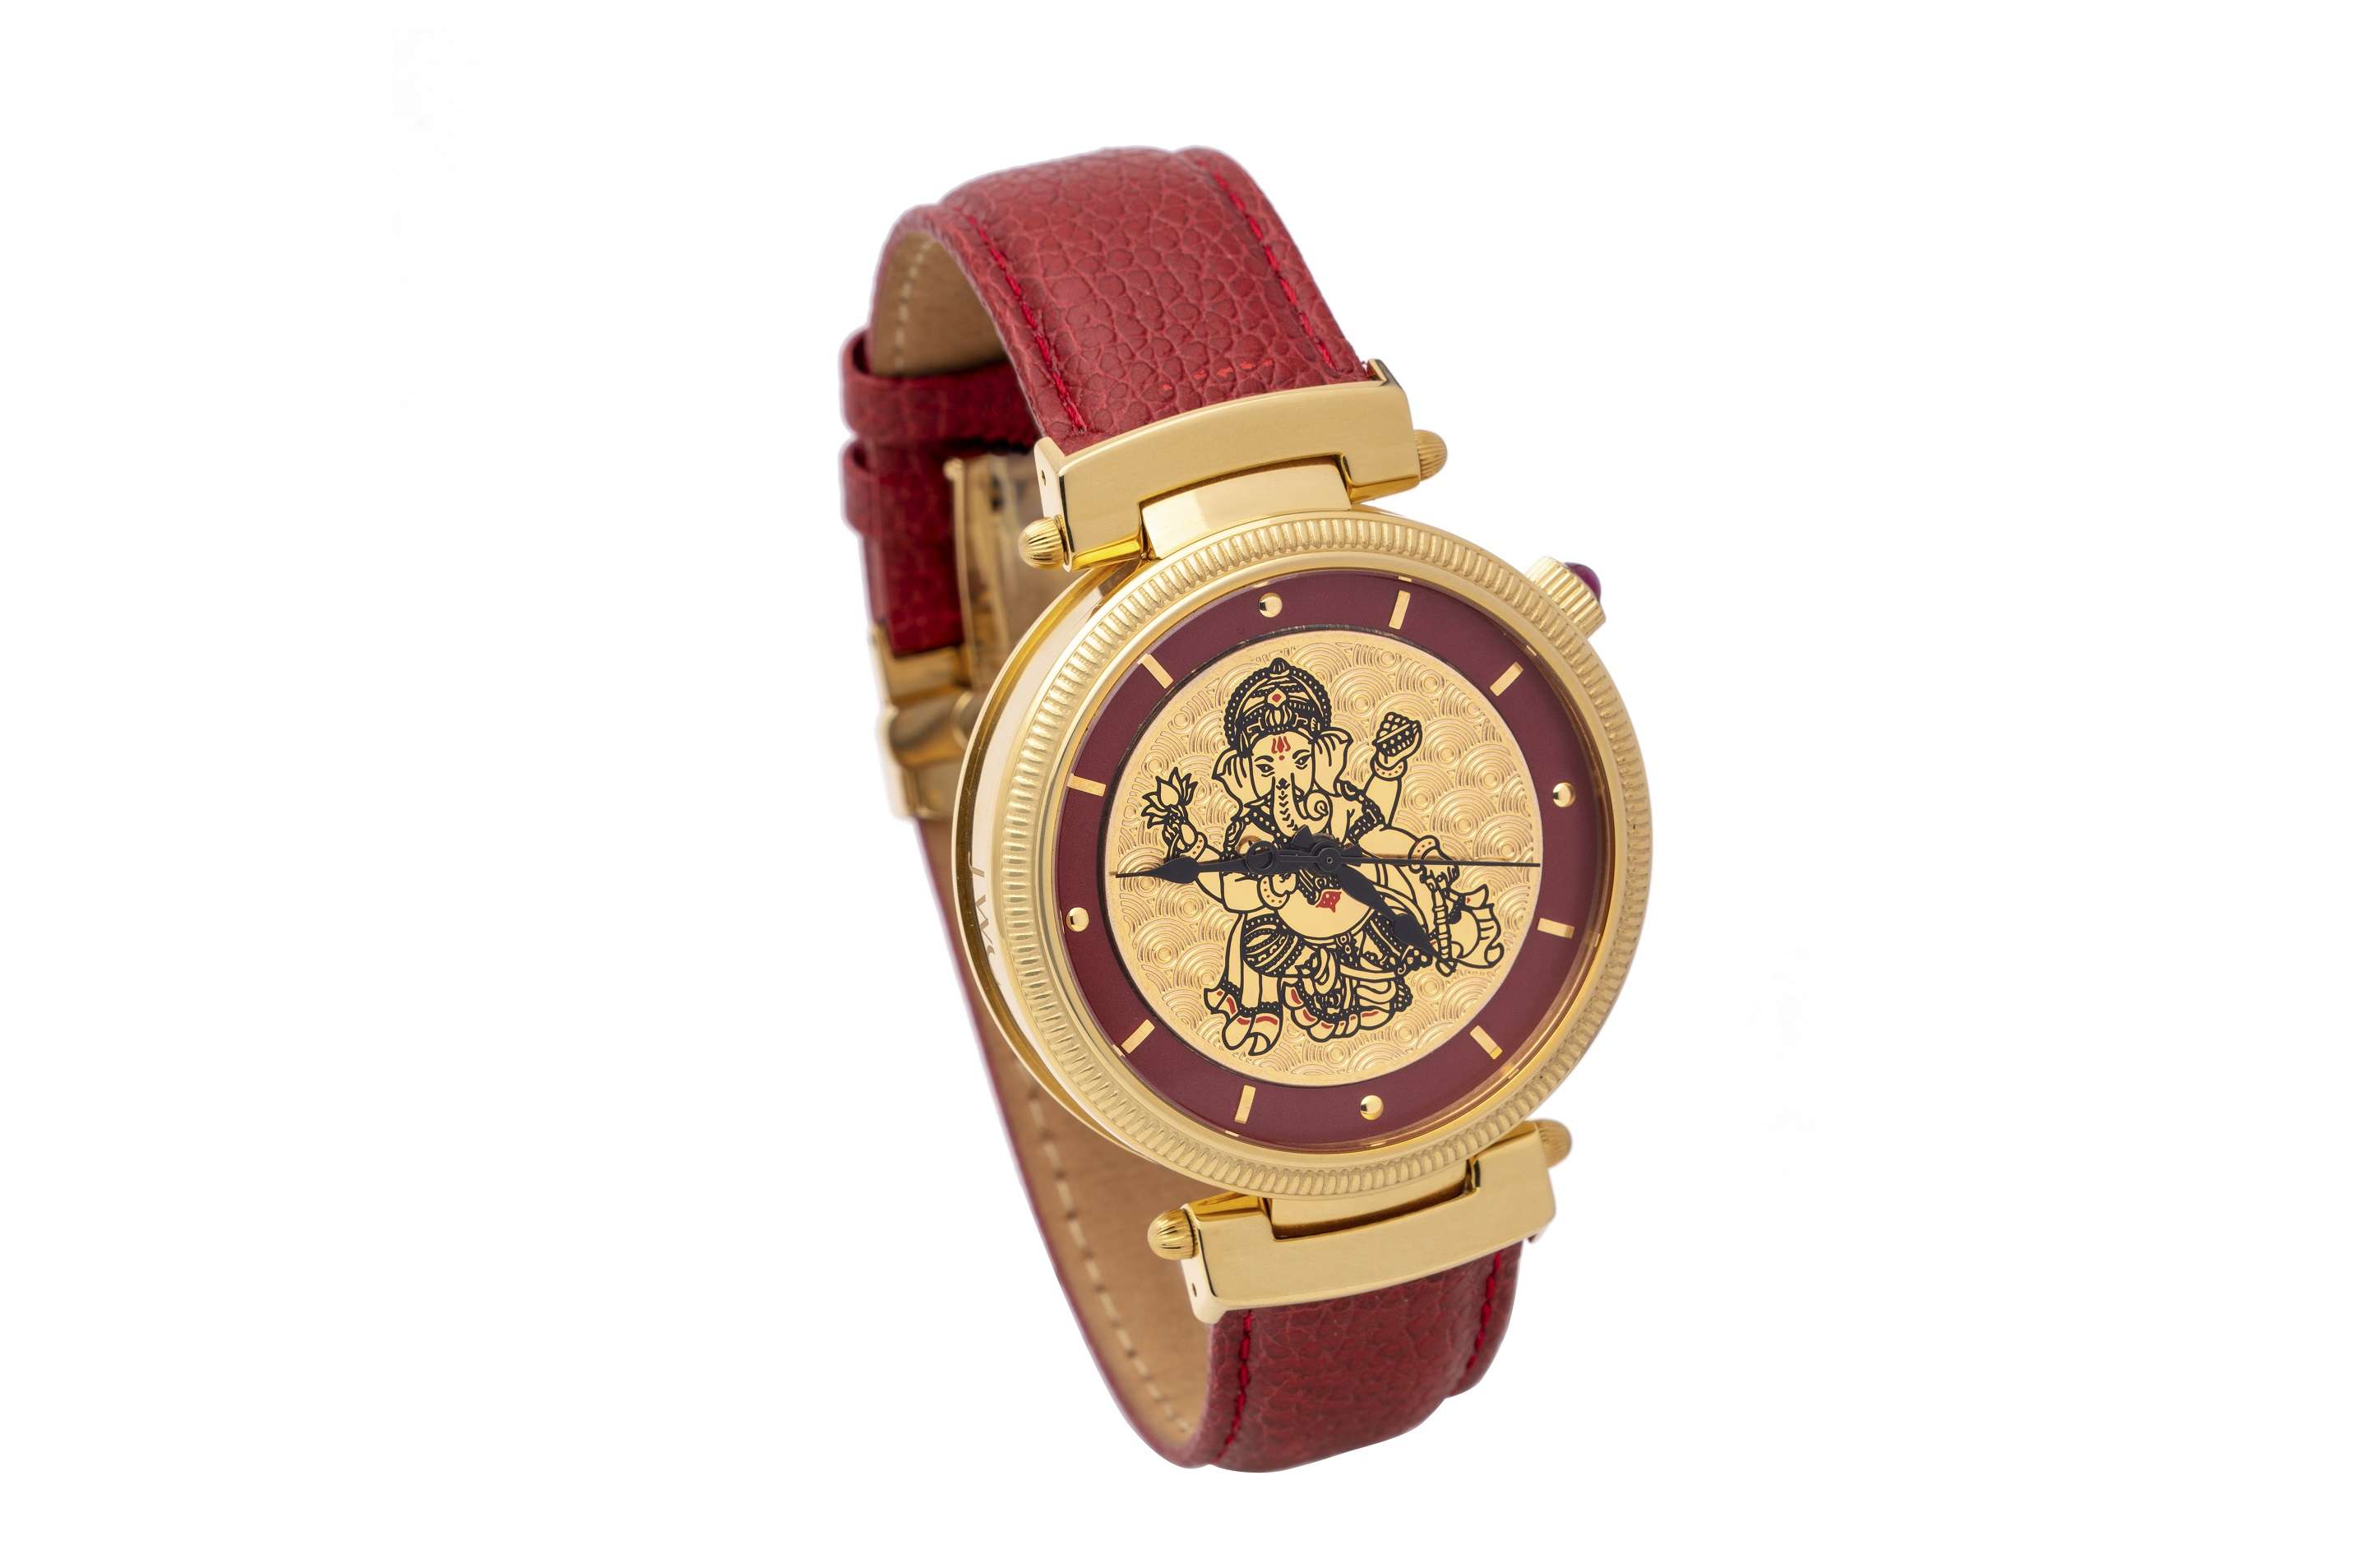 A time for art and history with Jaipur Watch Company